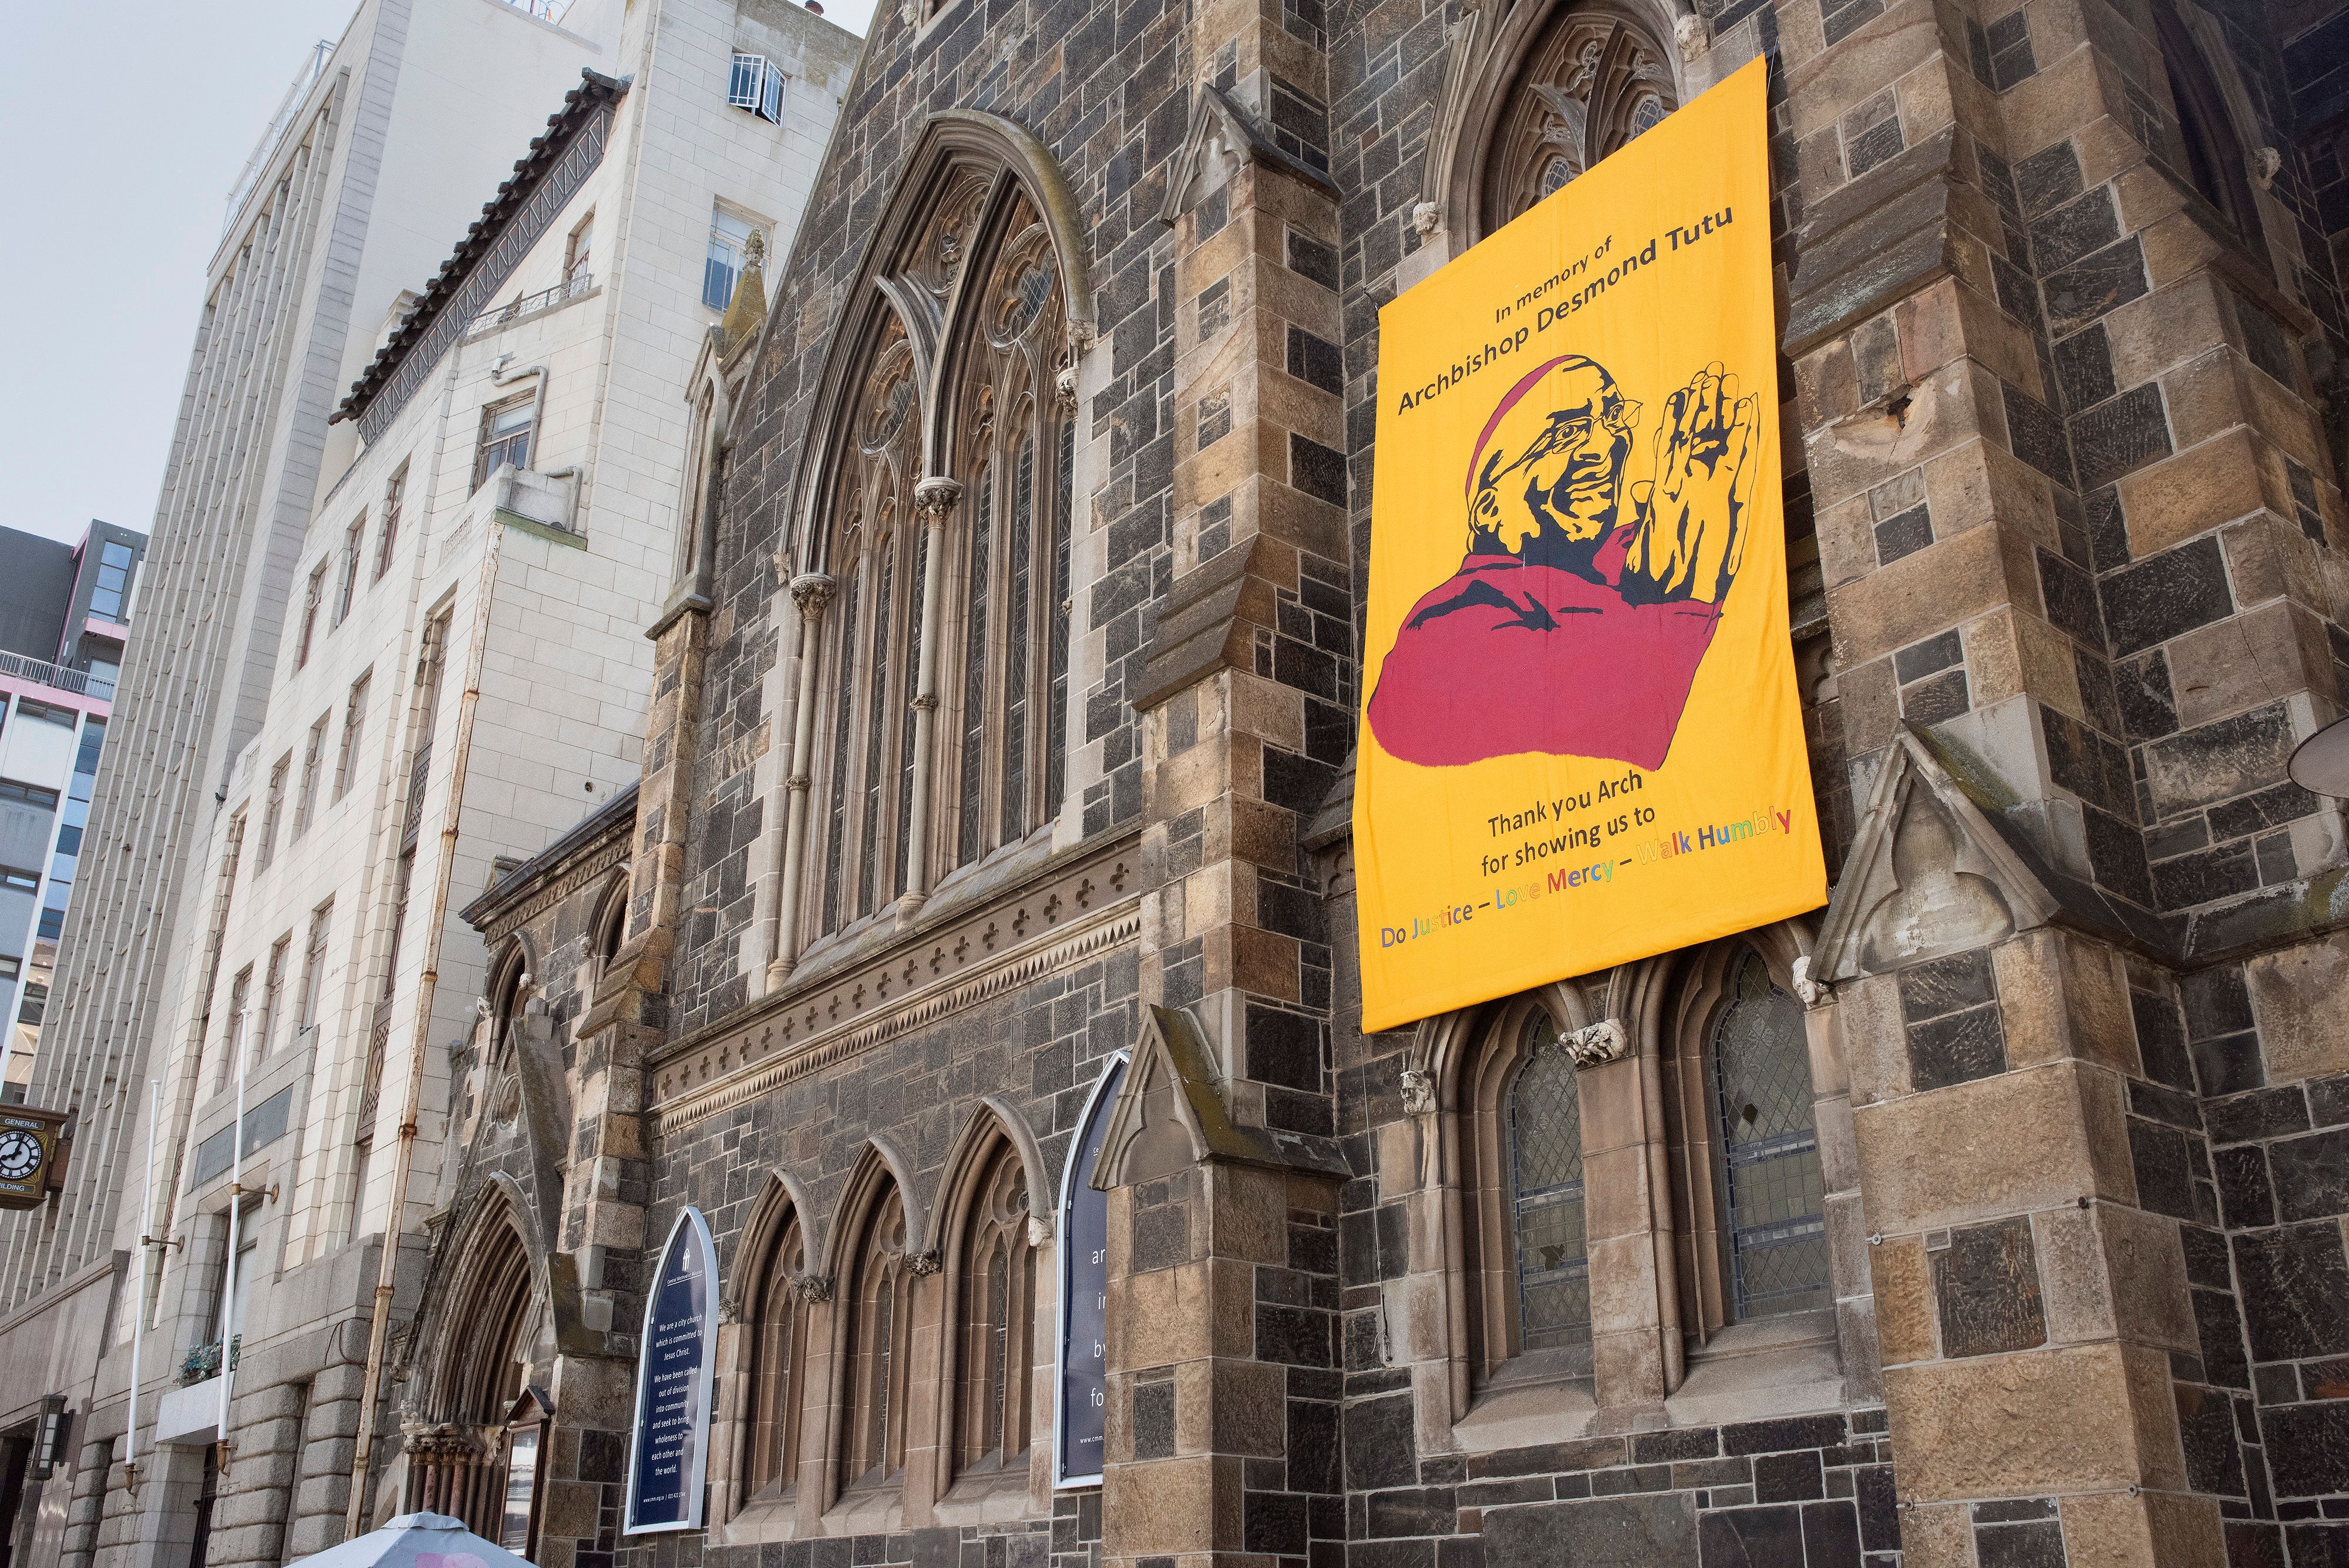 A poster of South African anti-apartheid icon Archbishop Desmond Tutu hangs at the Methodist Church after the news of his death, in Cape Town on December 26, 2021.